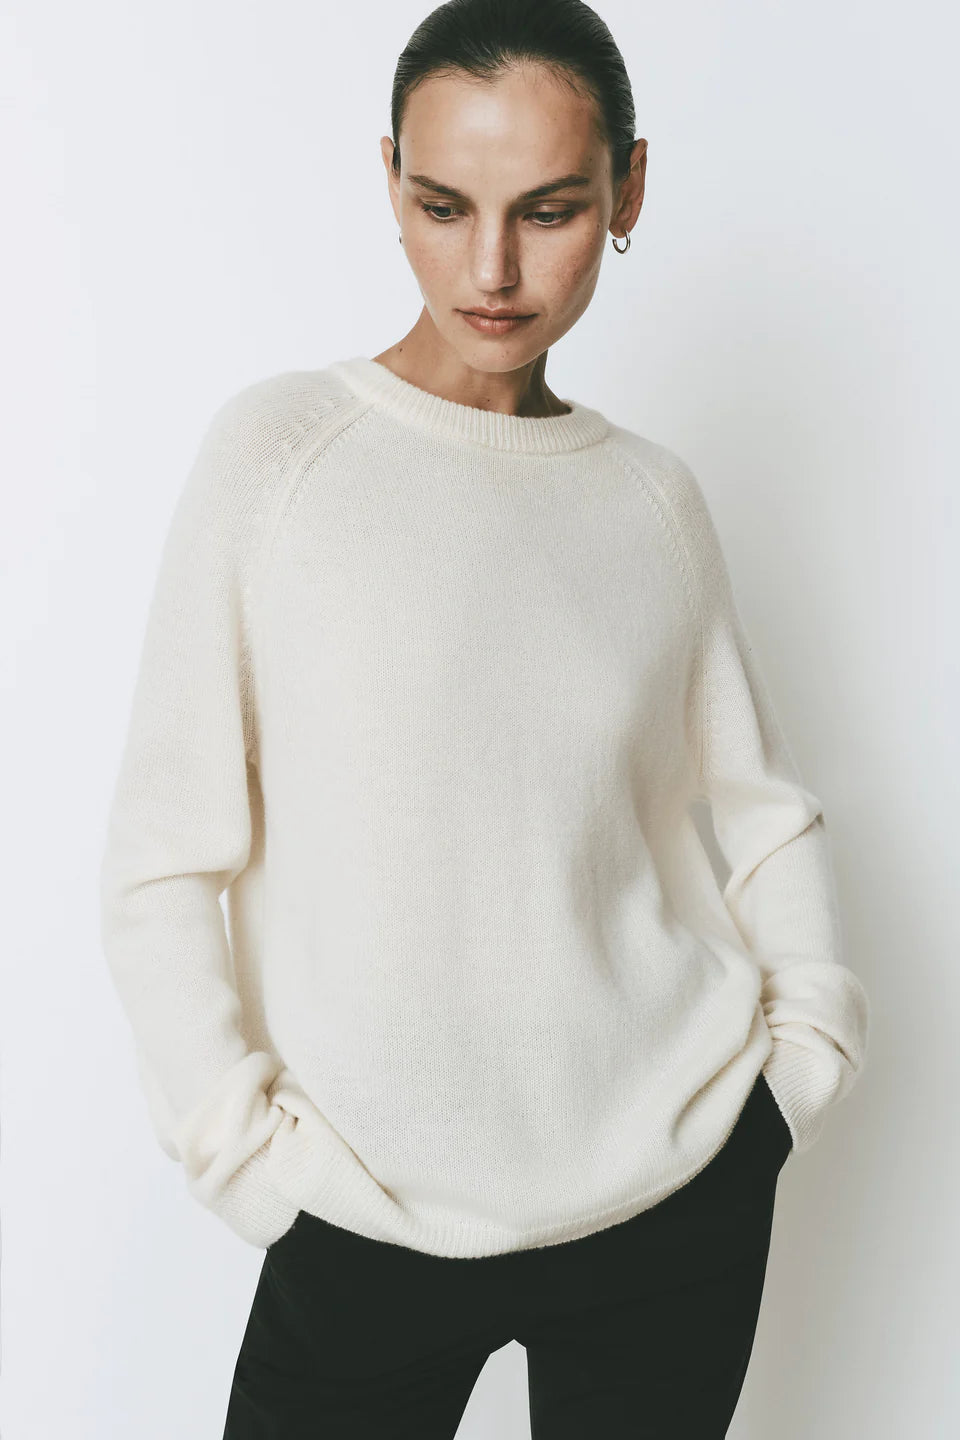 Sophie Rue Norte Sweater, relaxed fit sweater, crewneck sweater, sweater, women's clothing